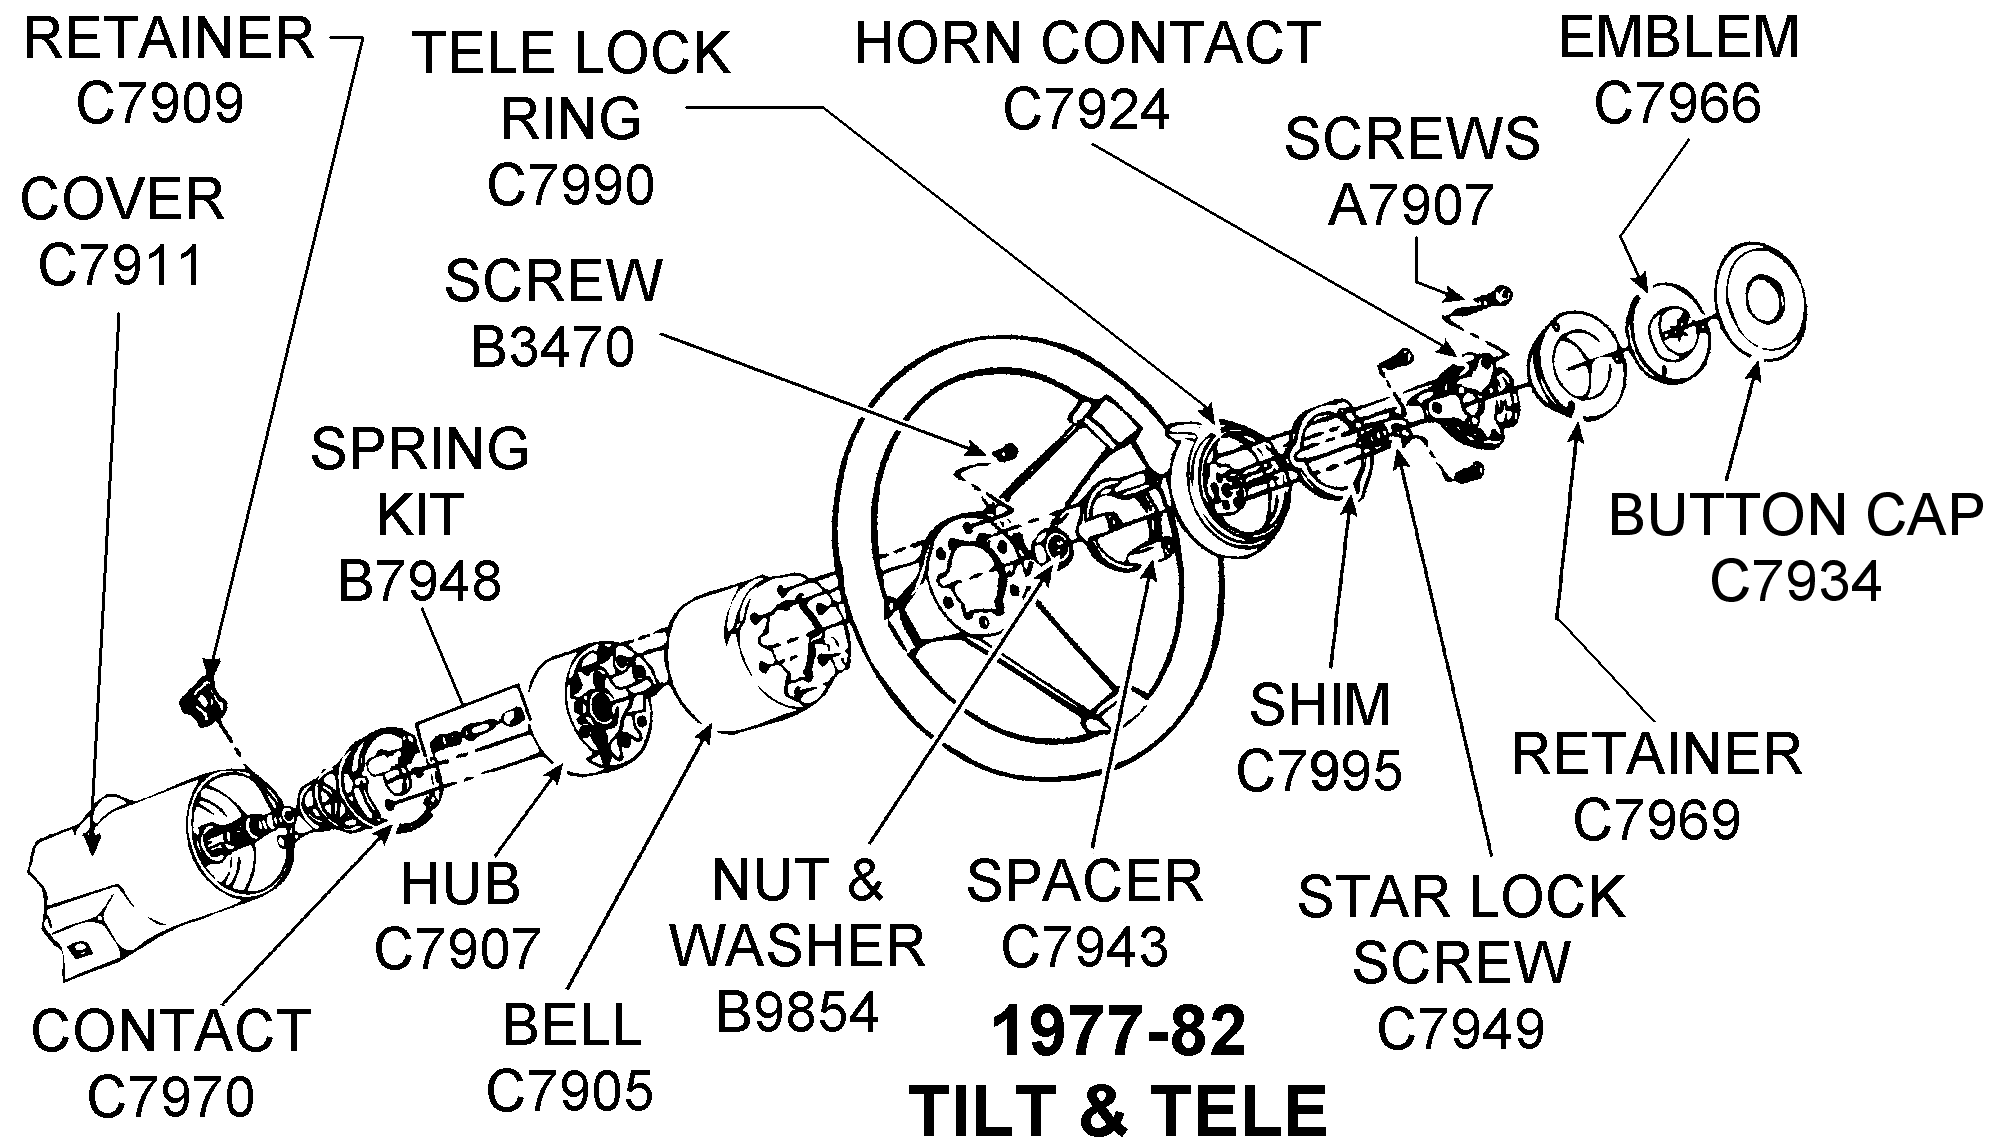 1982 horn repair questions, what are these ... 82 corvette fuse box diagram 